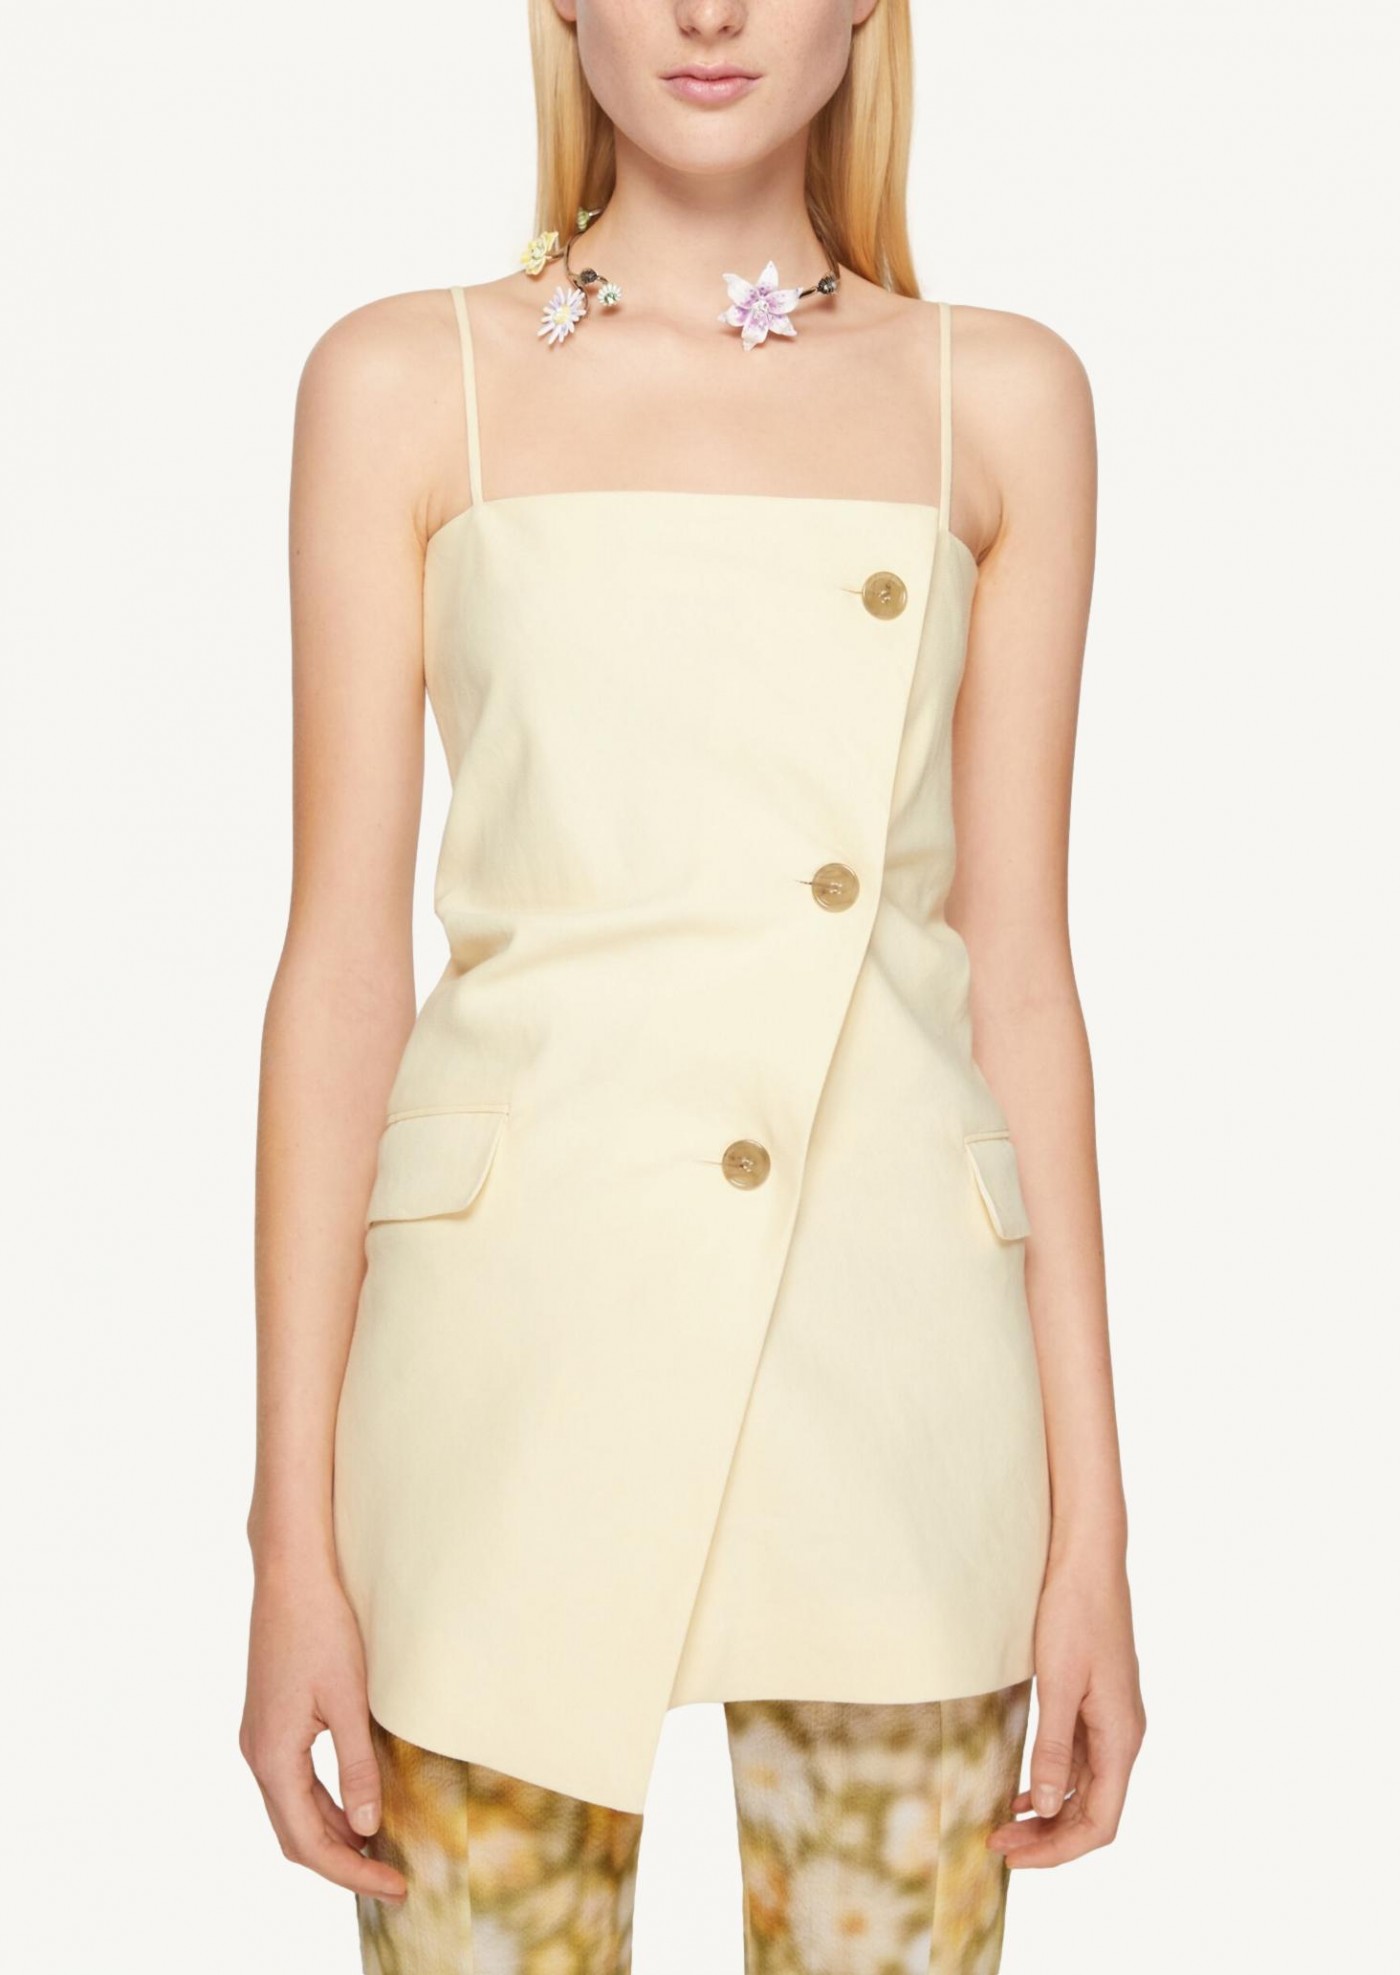 Dress top with yellow straps